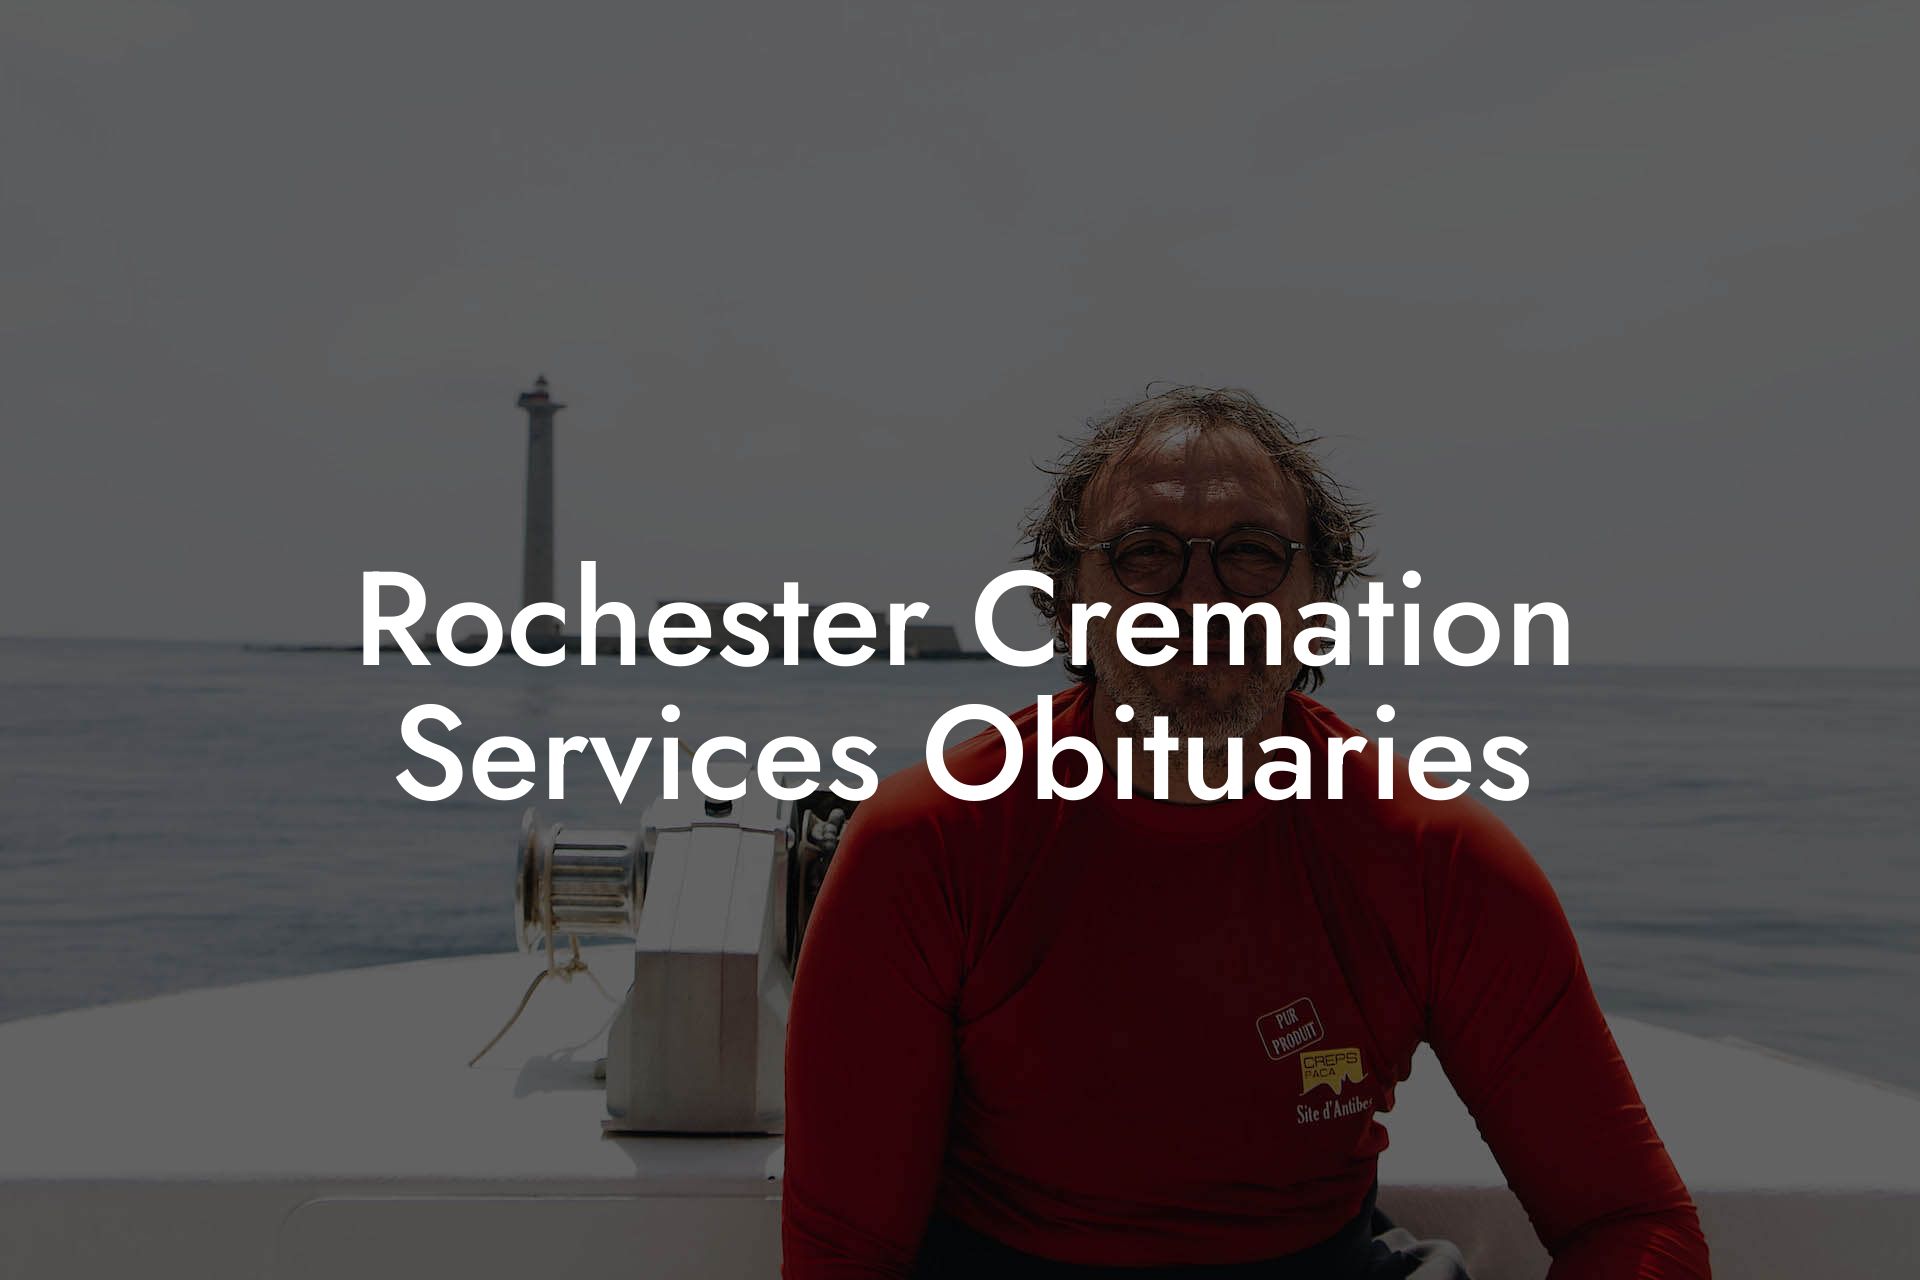 Rochester Cremation Services Obituaries